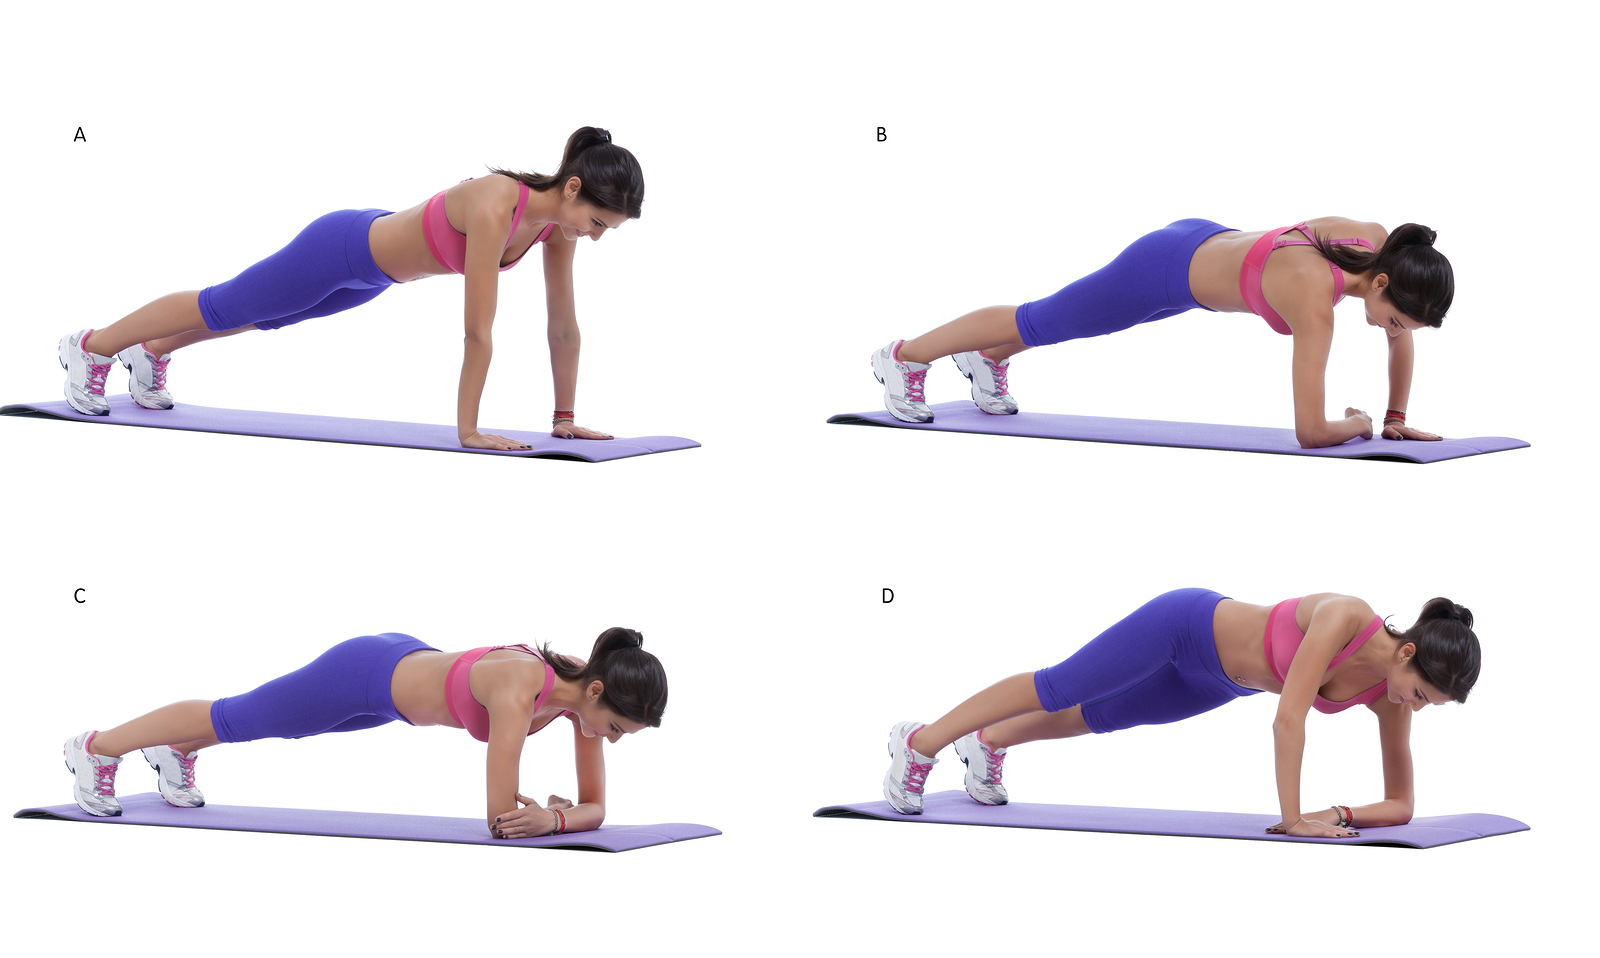 Step by step instructions: Get into plank position with arms straight. (A) Stay on your right elbow as the left arms remains straight. (B) Low your left elbow too. (C) Then stay on your left elbow as the right elbow remains straight. (D)